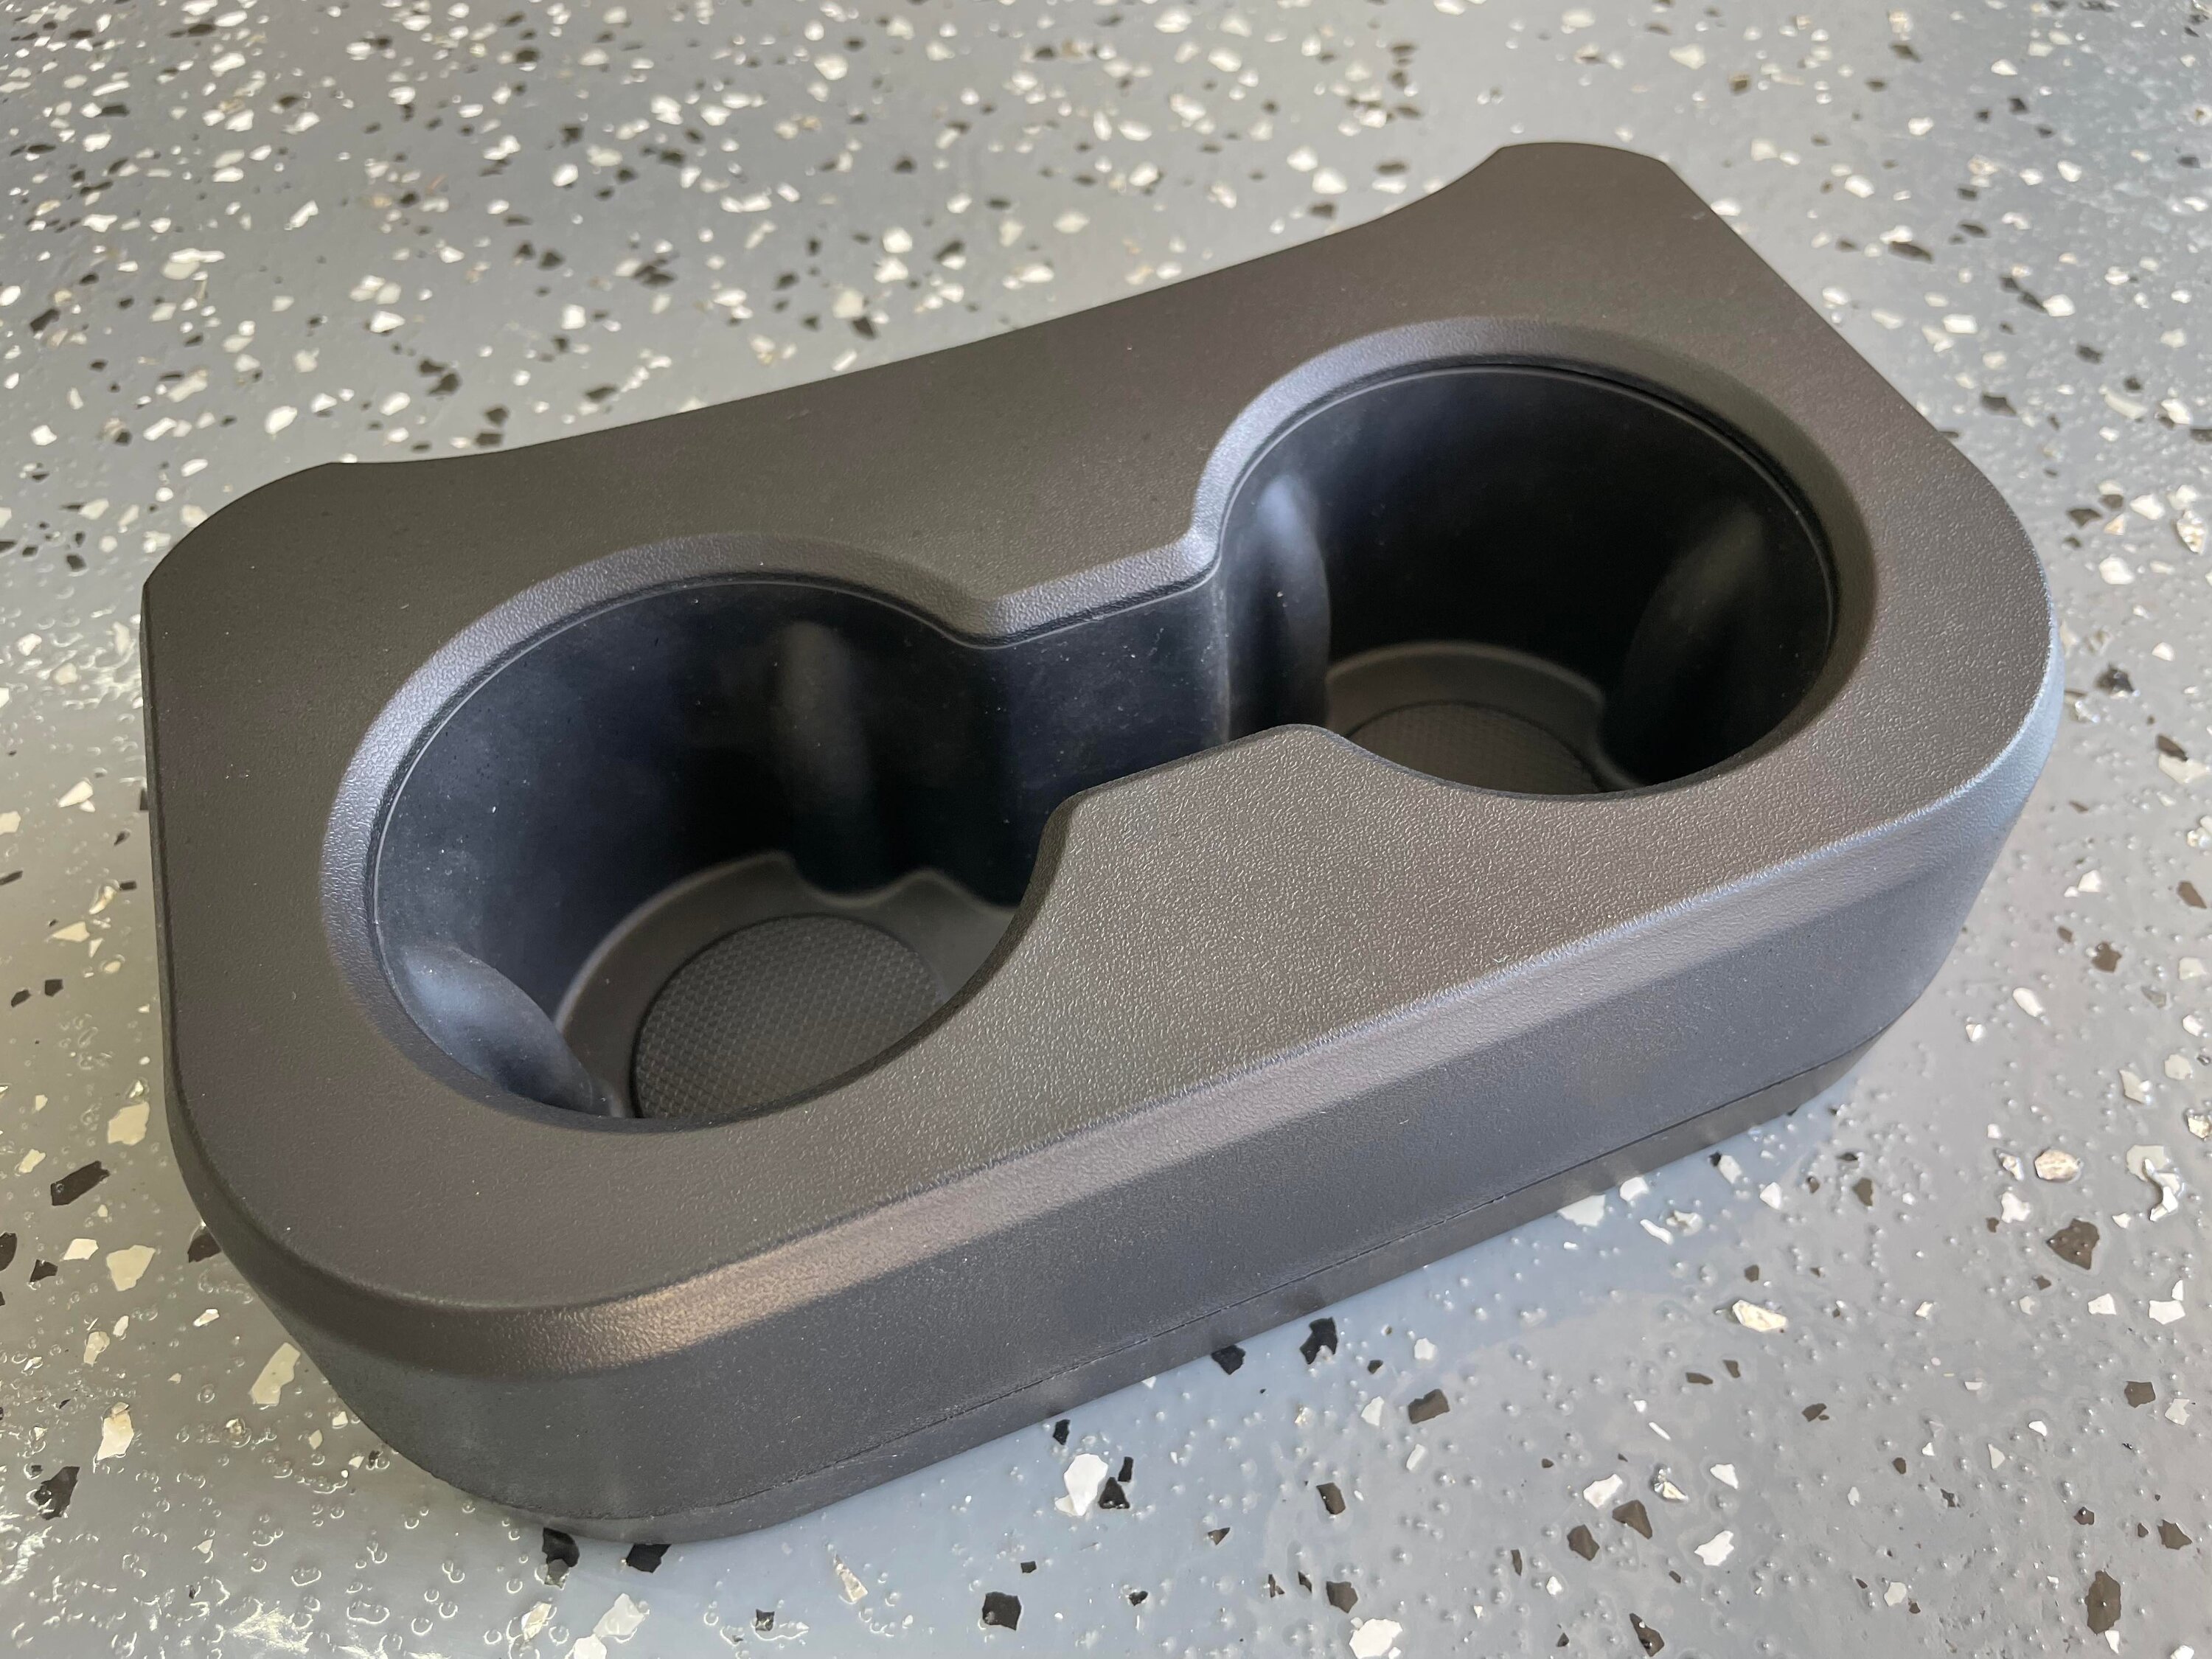 Ford Bronco Mabett Launches Removable Rear Dual Cup Holder fits Ford Bronco 21-23+! 326977993_1204046450218899_1168609576468480816_n